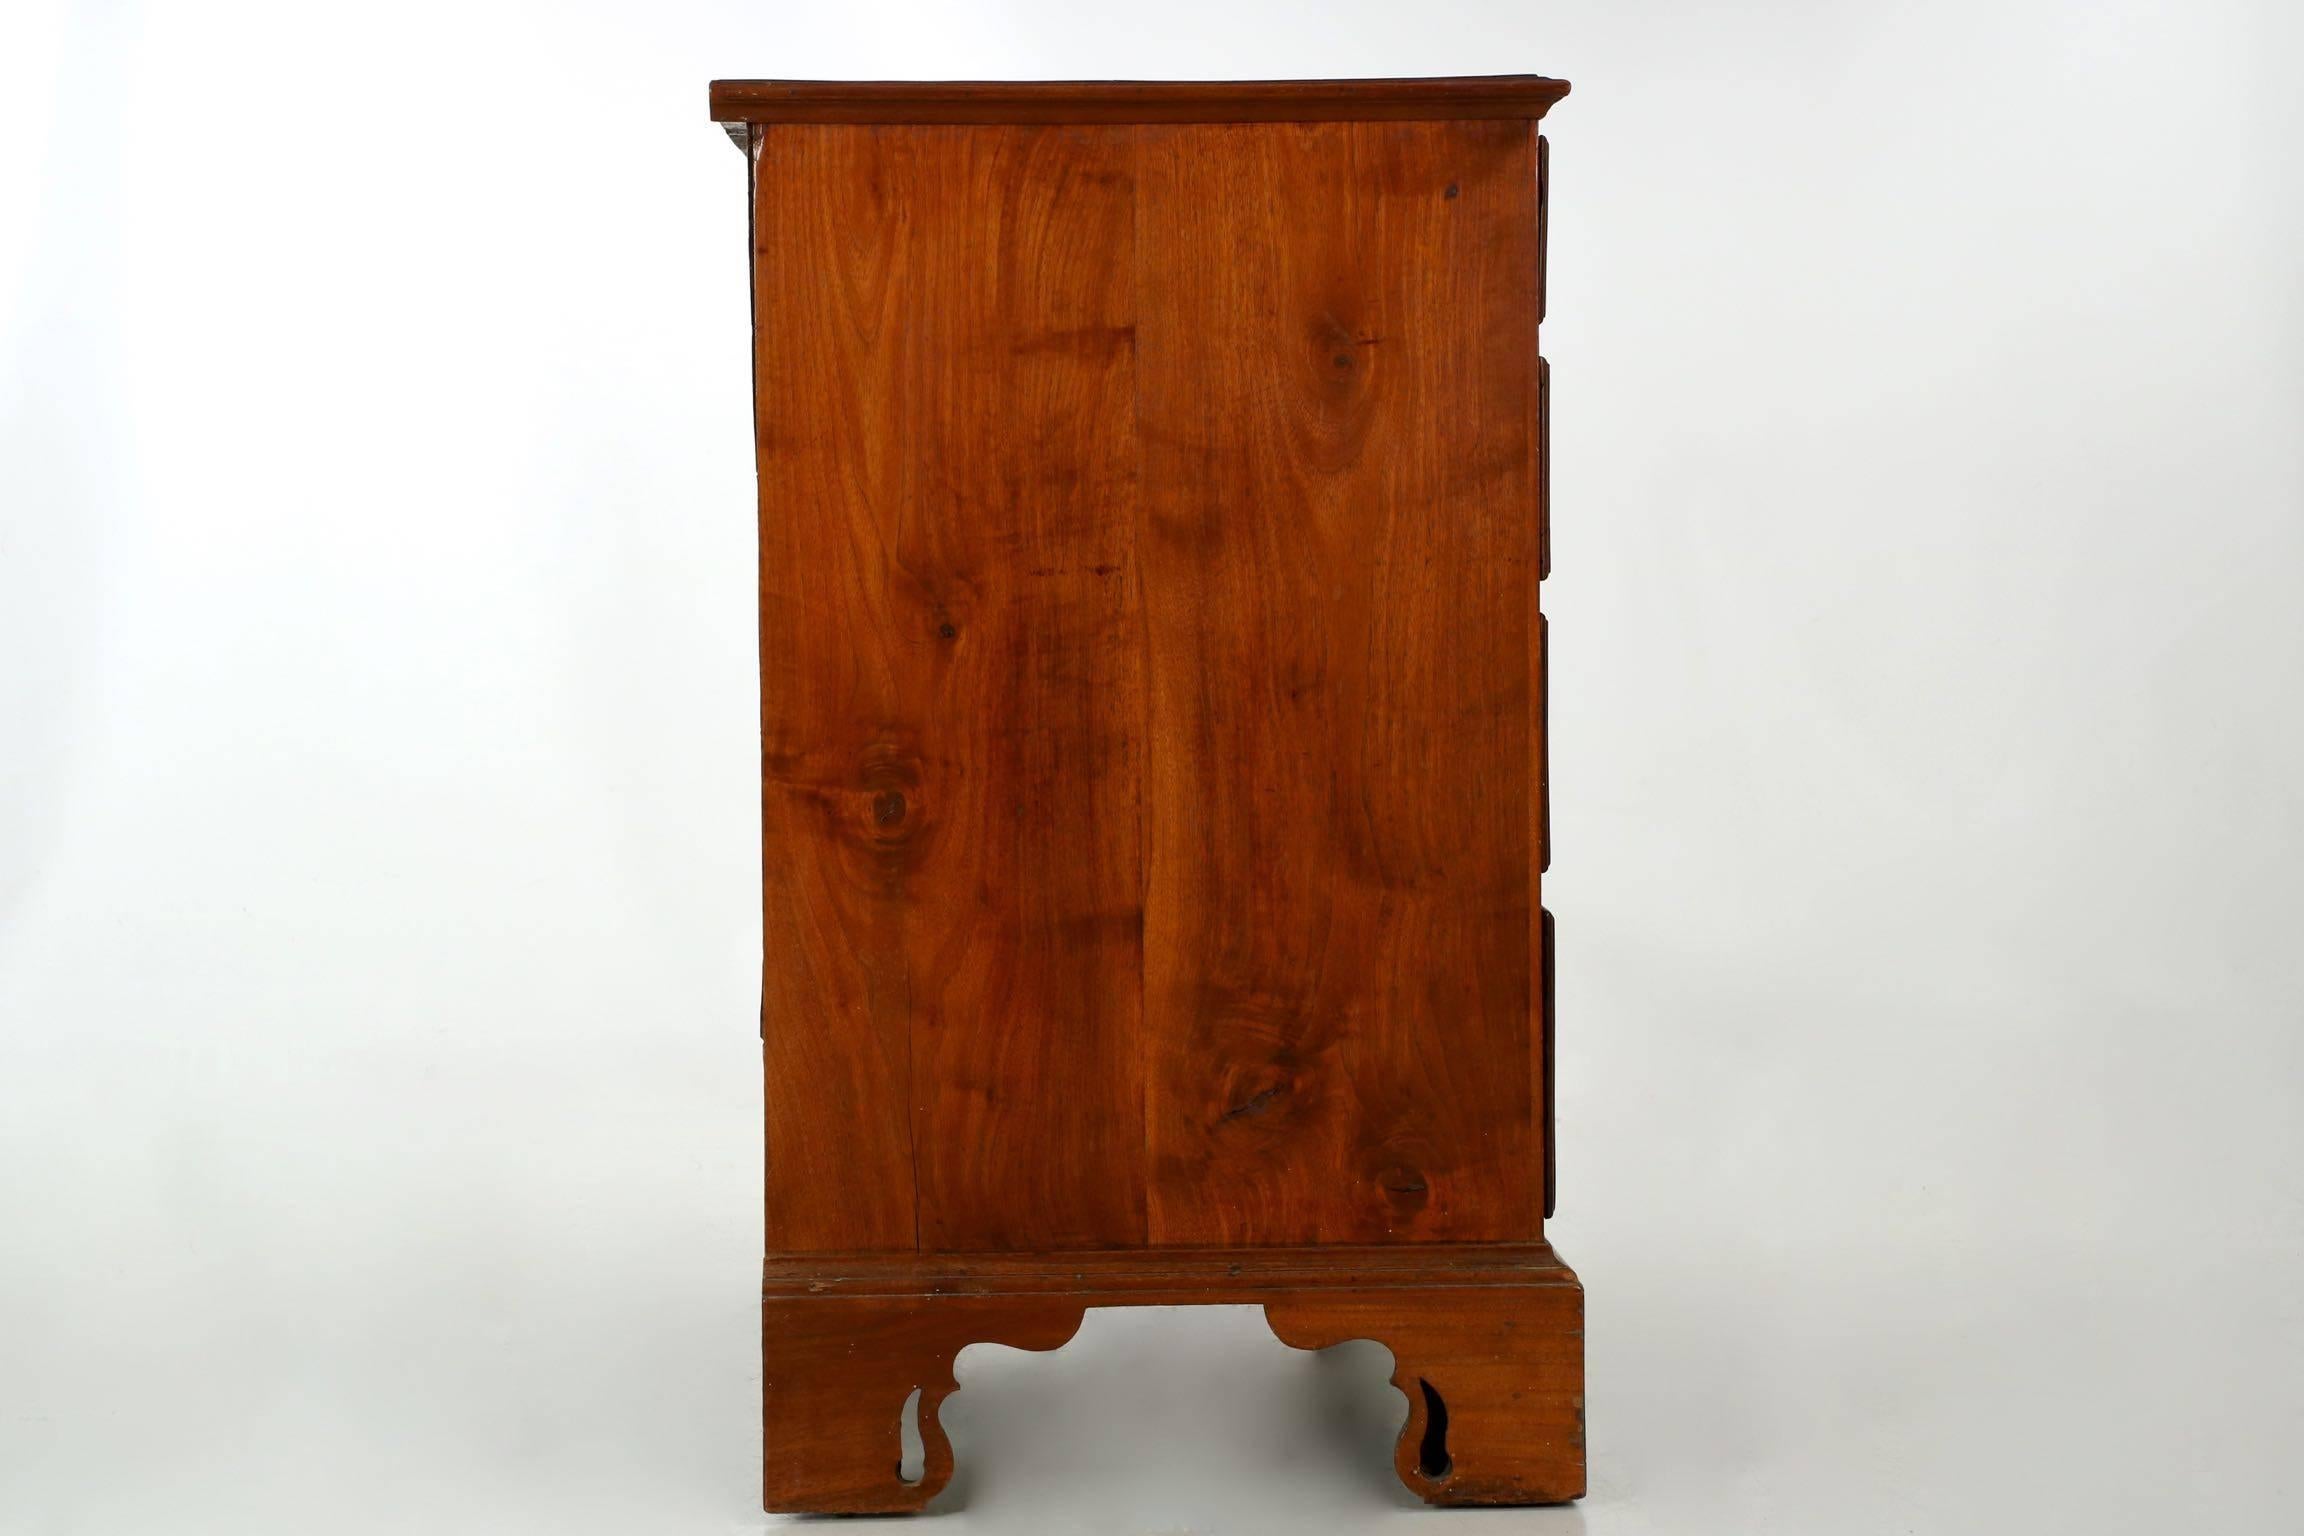 A rare and unusual chest, it is simple in construction and appeal, set apart by it's highly interesting pierced bracket feet. The feet are complex, the outer edges an ogival form interrupted by a series of fillets; the last stretch of the foot is